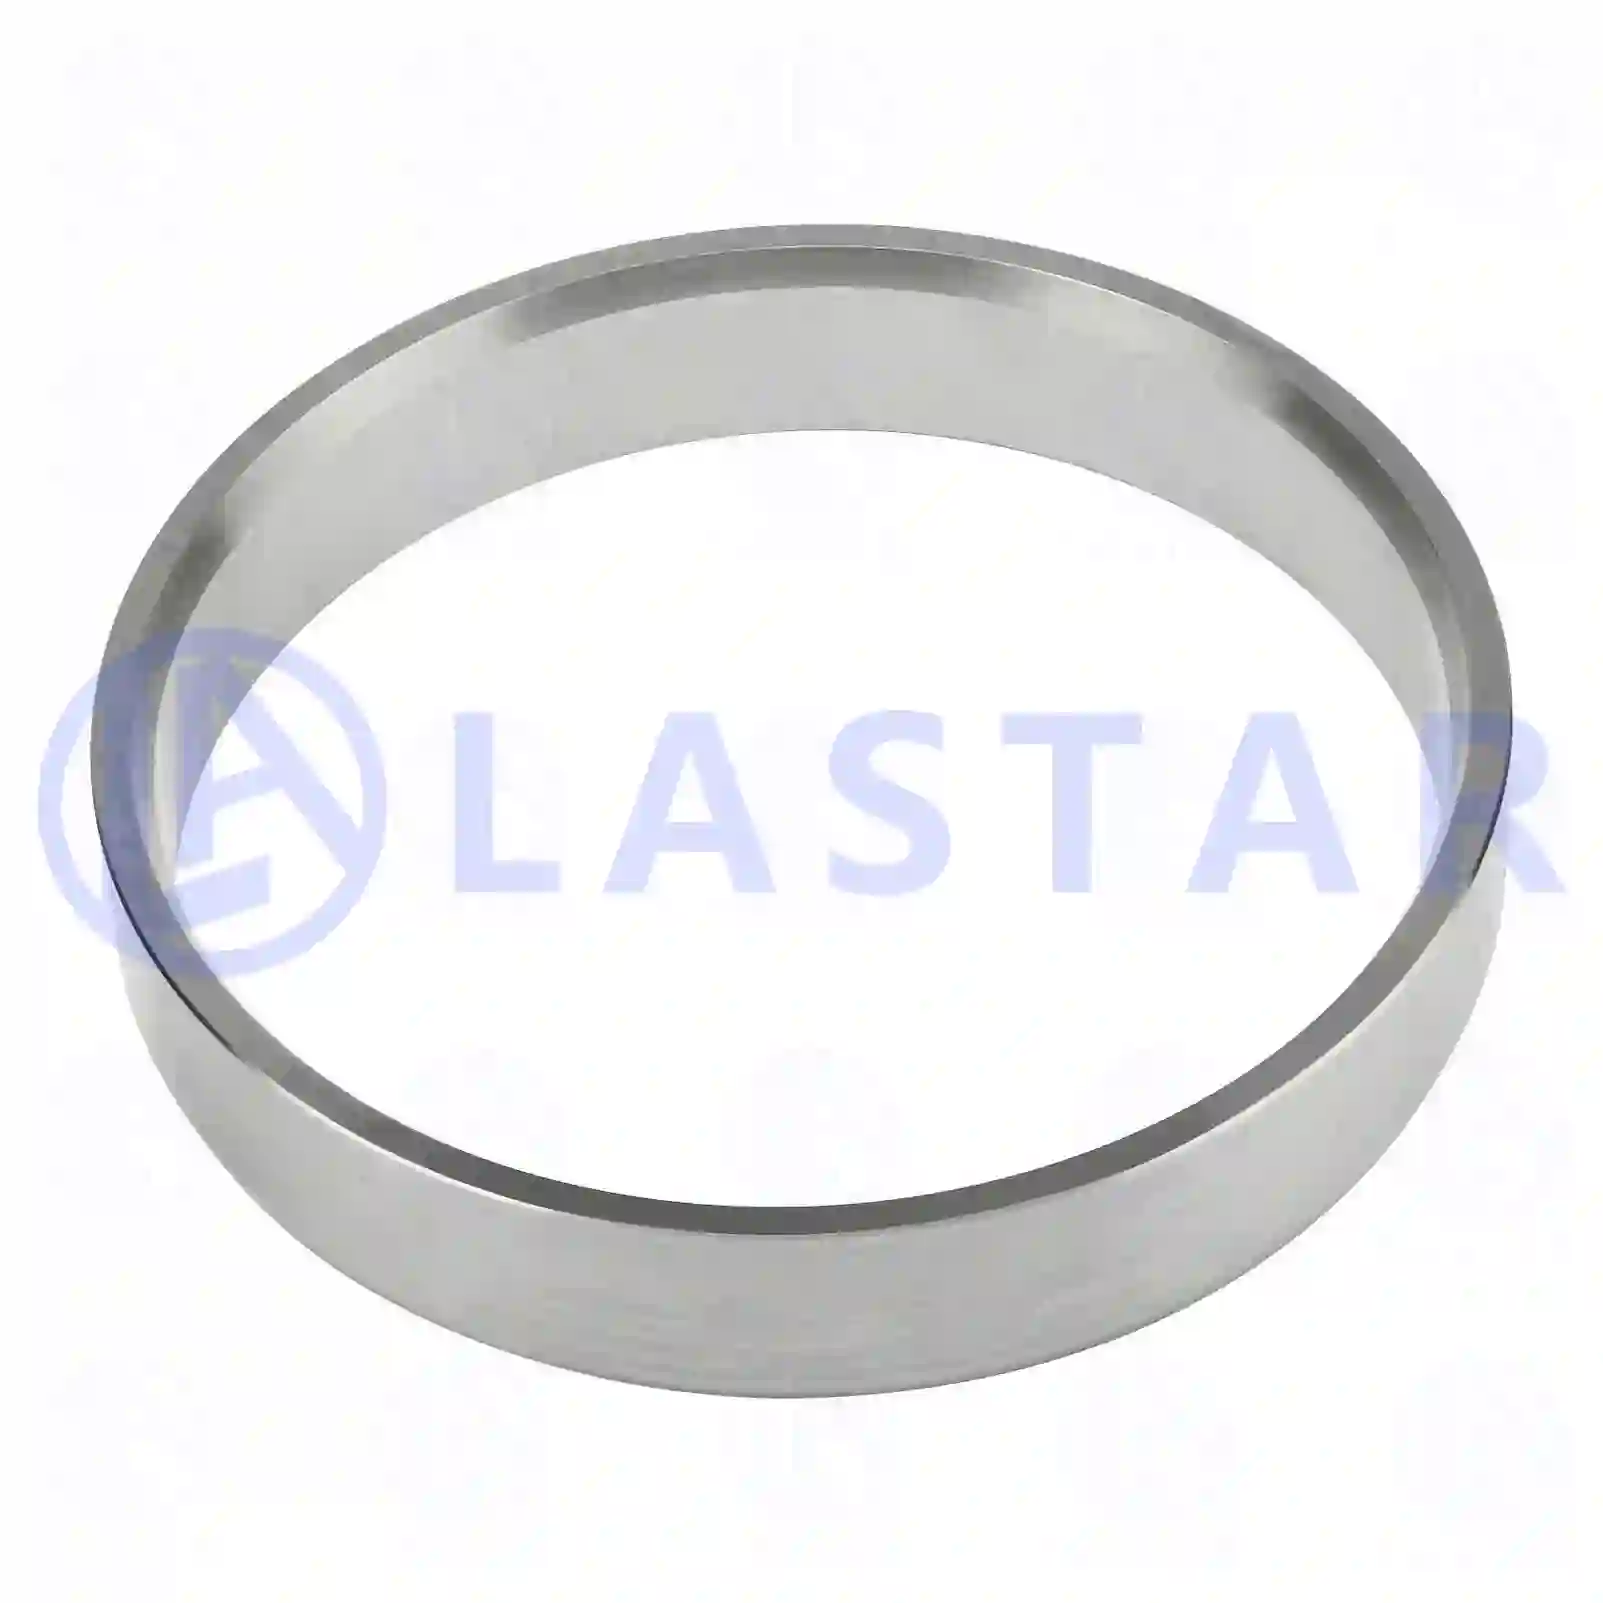 Wear ring, 77730886, 1522374, 1672283, ||  77730886 Lastar Spare Part | Truck Spare Parts, Auotomotive Spare Parts Wear ring, 77730886, 1522374, 1672283, ||  77730886 Lastar Spare Part | Truck Spare Parts, Auotomotive Spare Parts